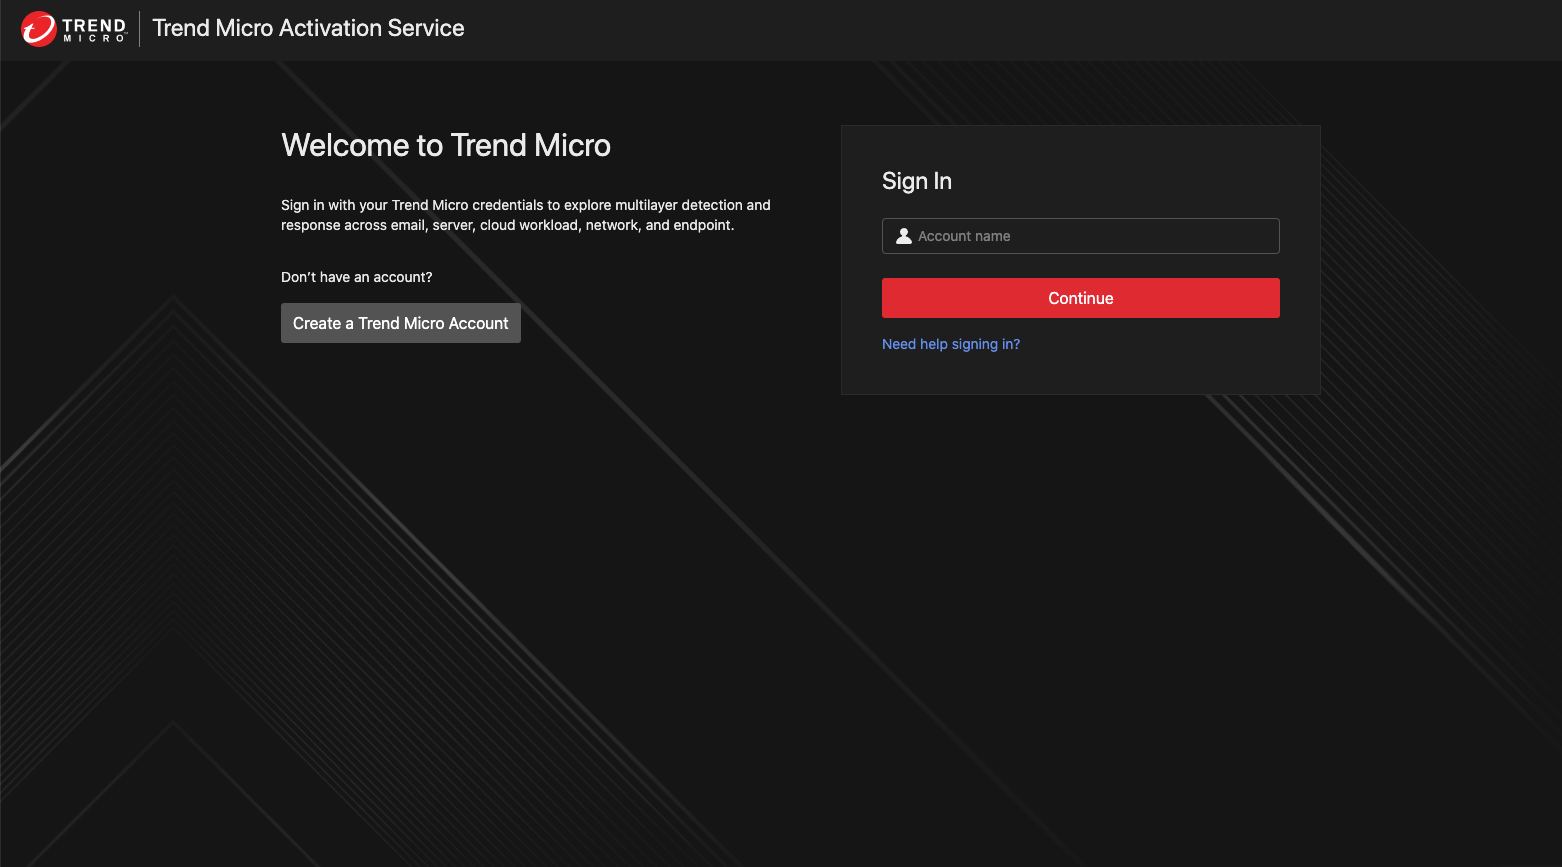 Trend Micro Activation Service page with Sign In